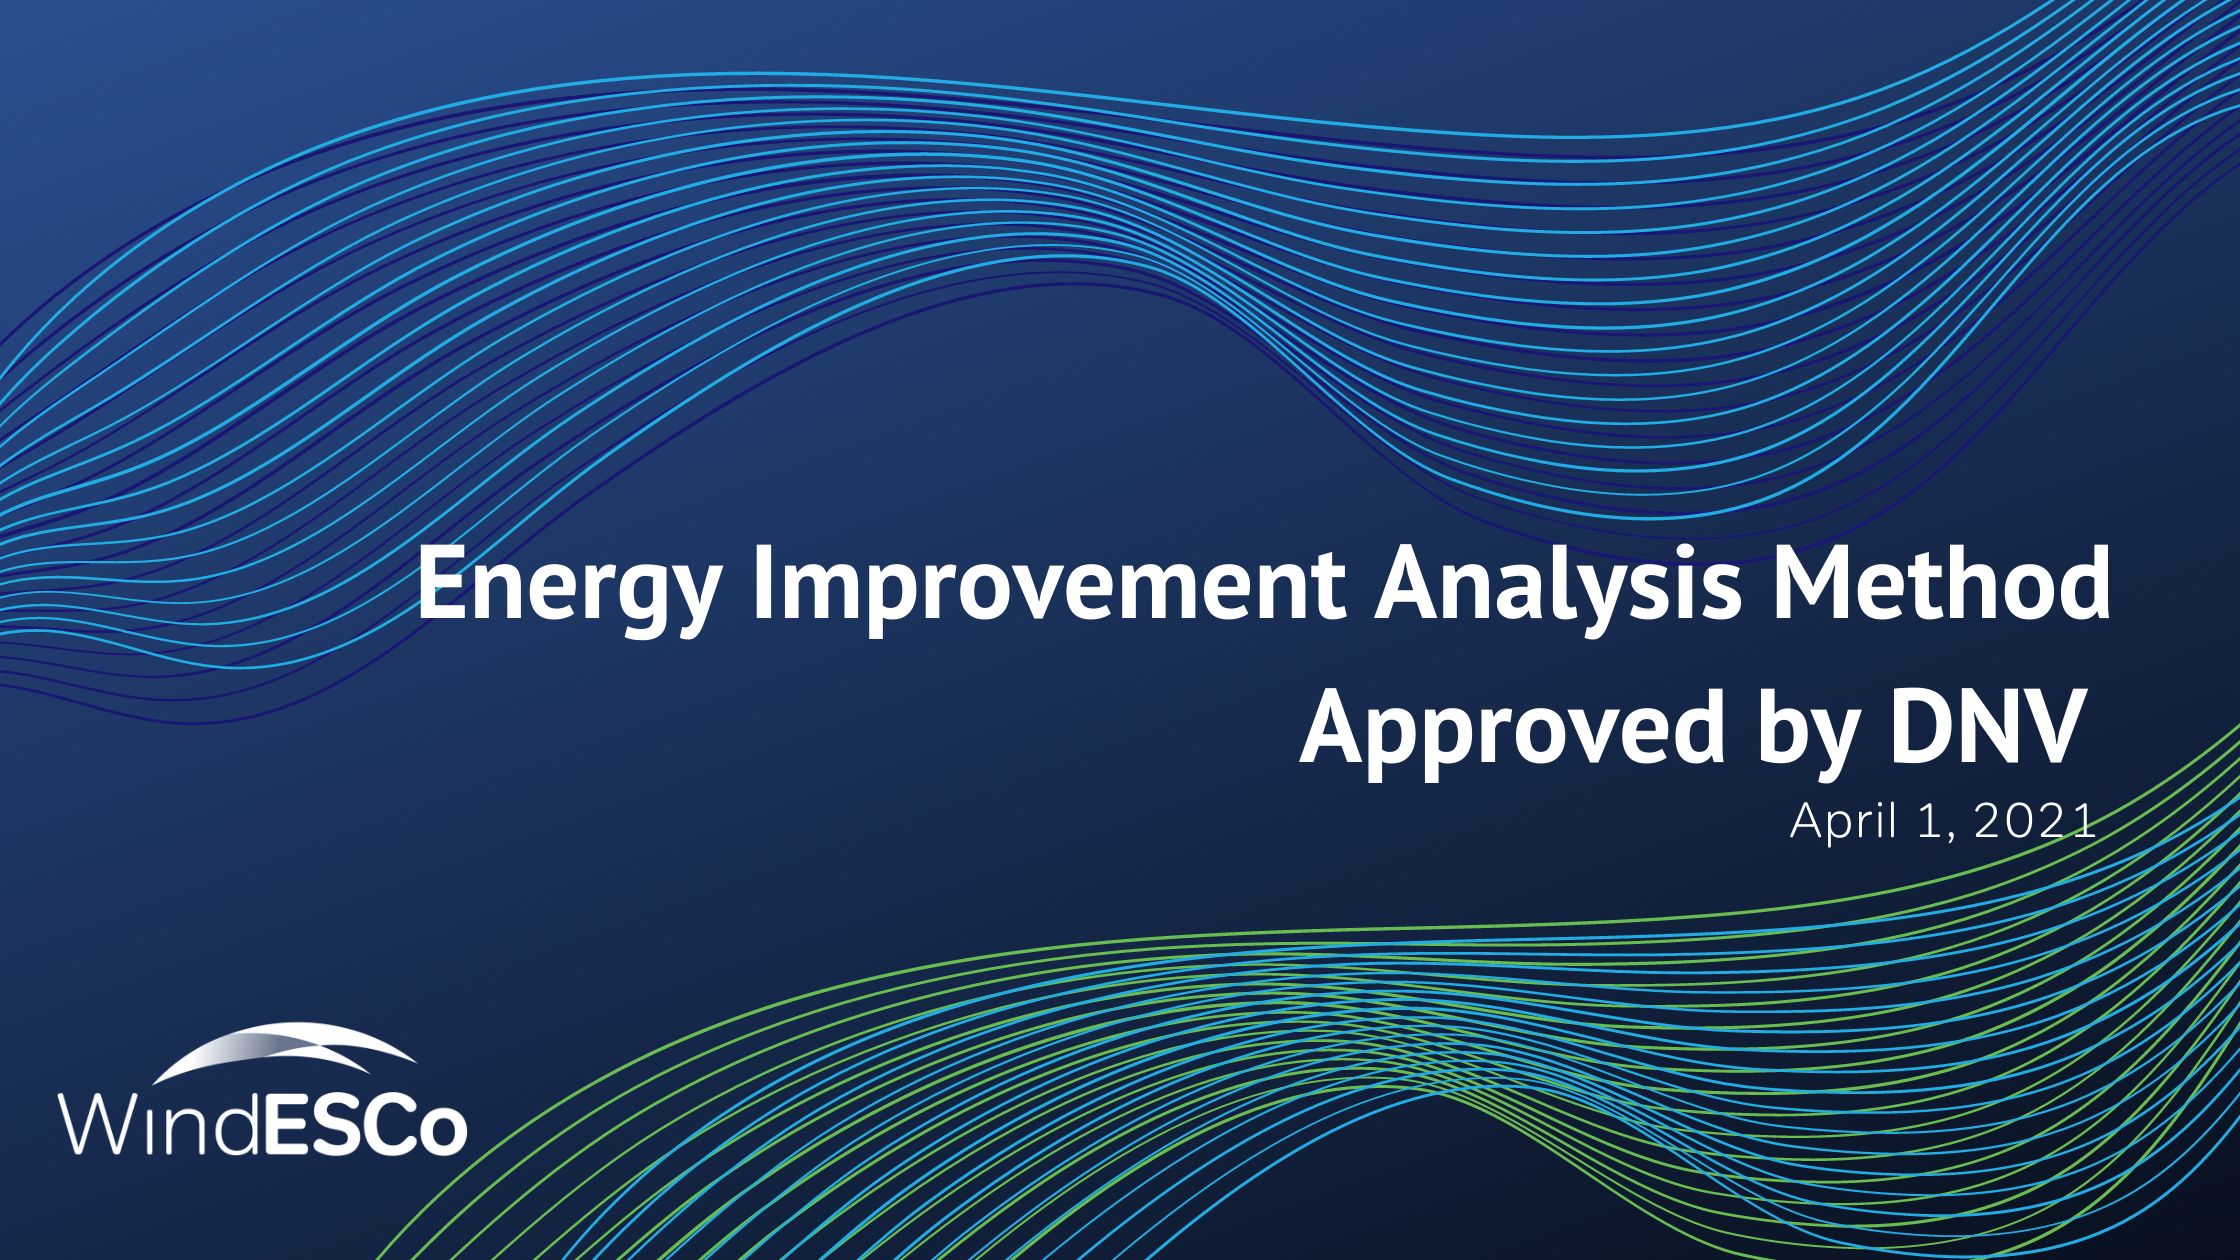 WindESCo Receives Approval from DNV for its Energy Improvement Analysis Method for Wind Turbines